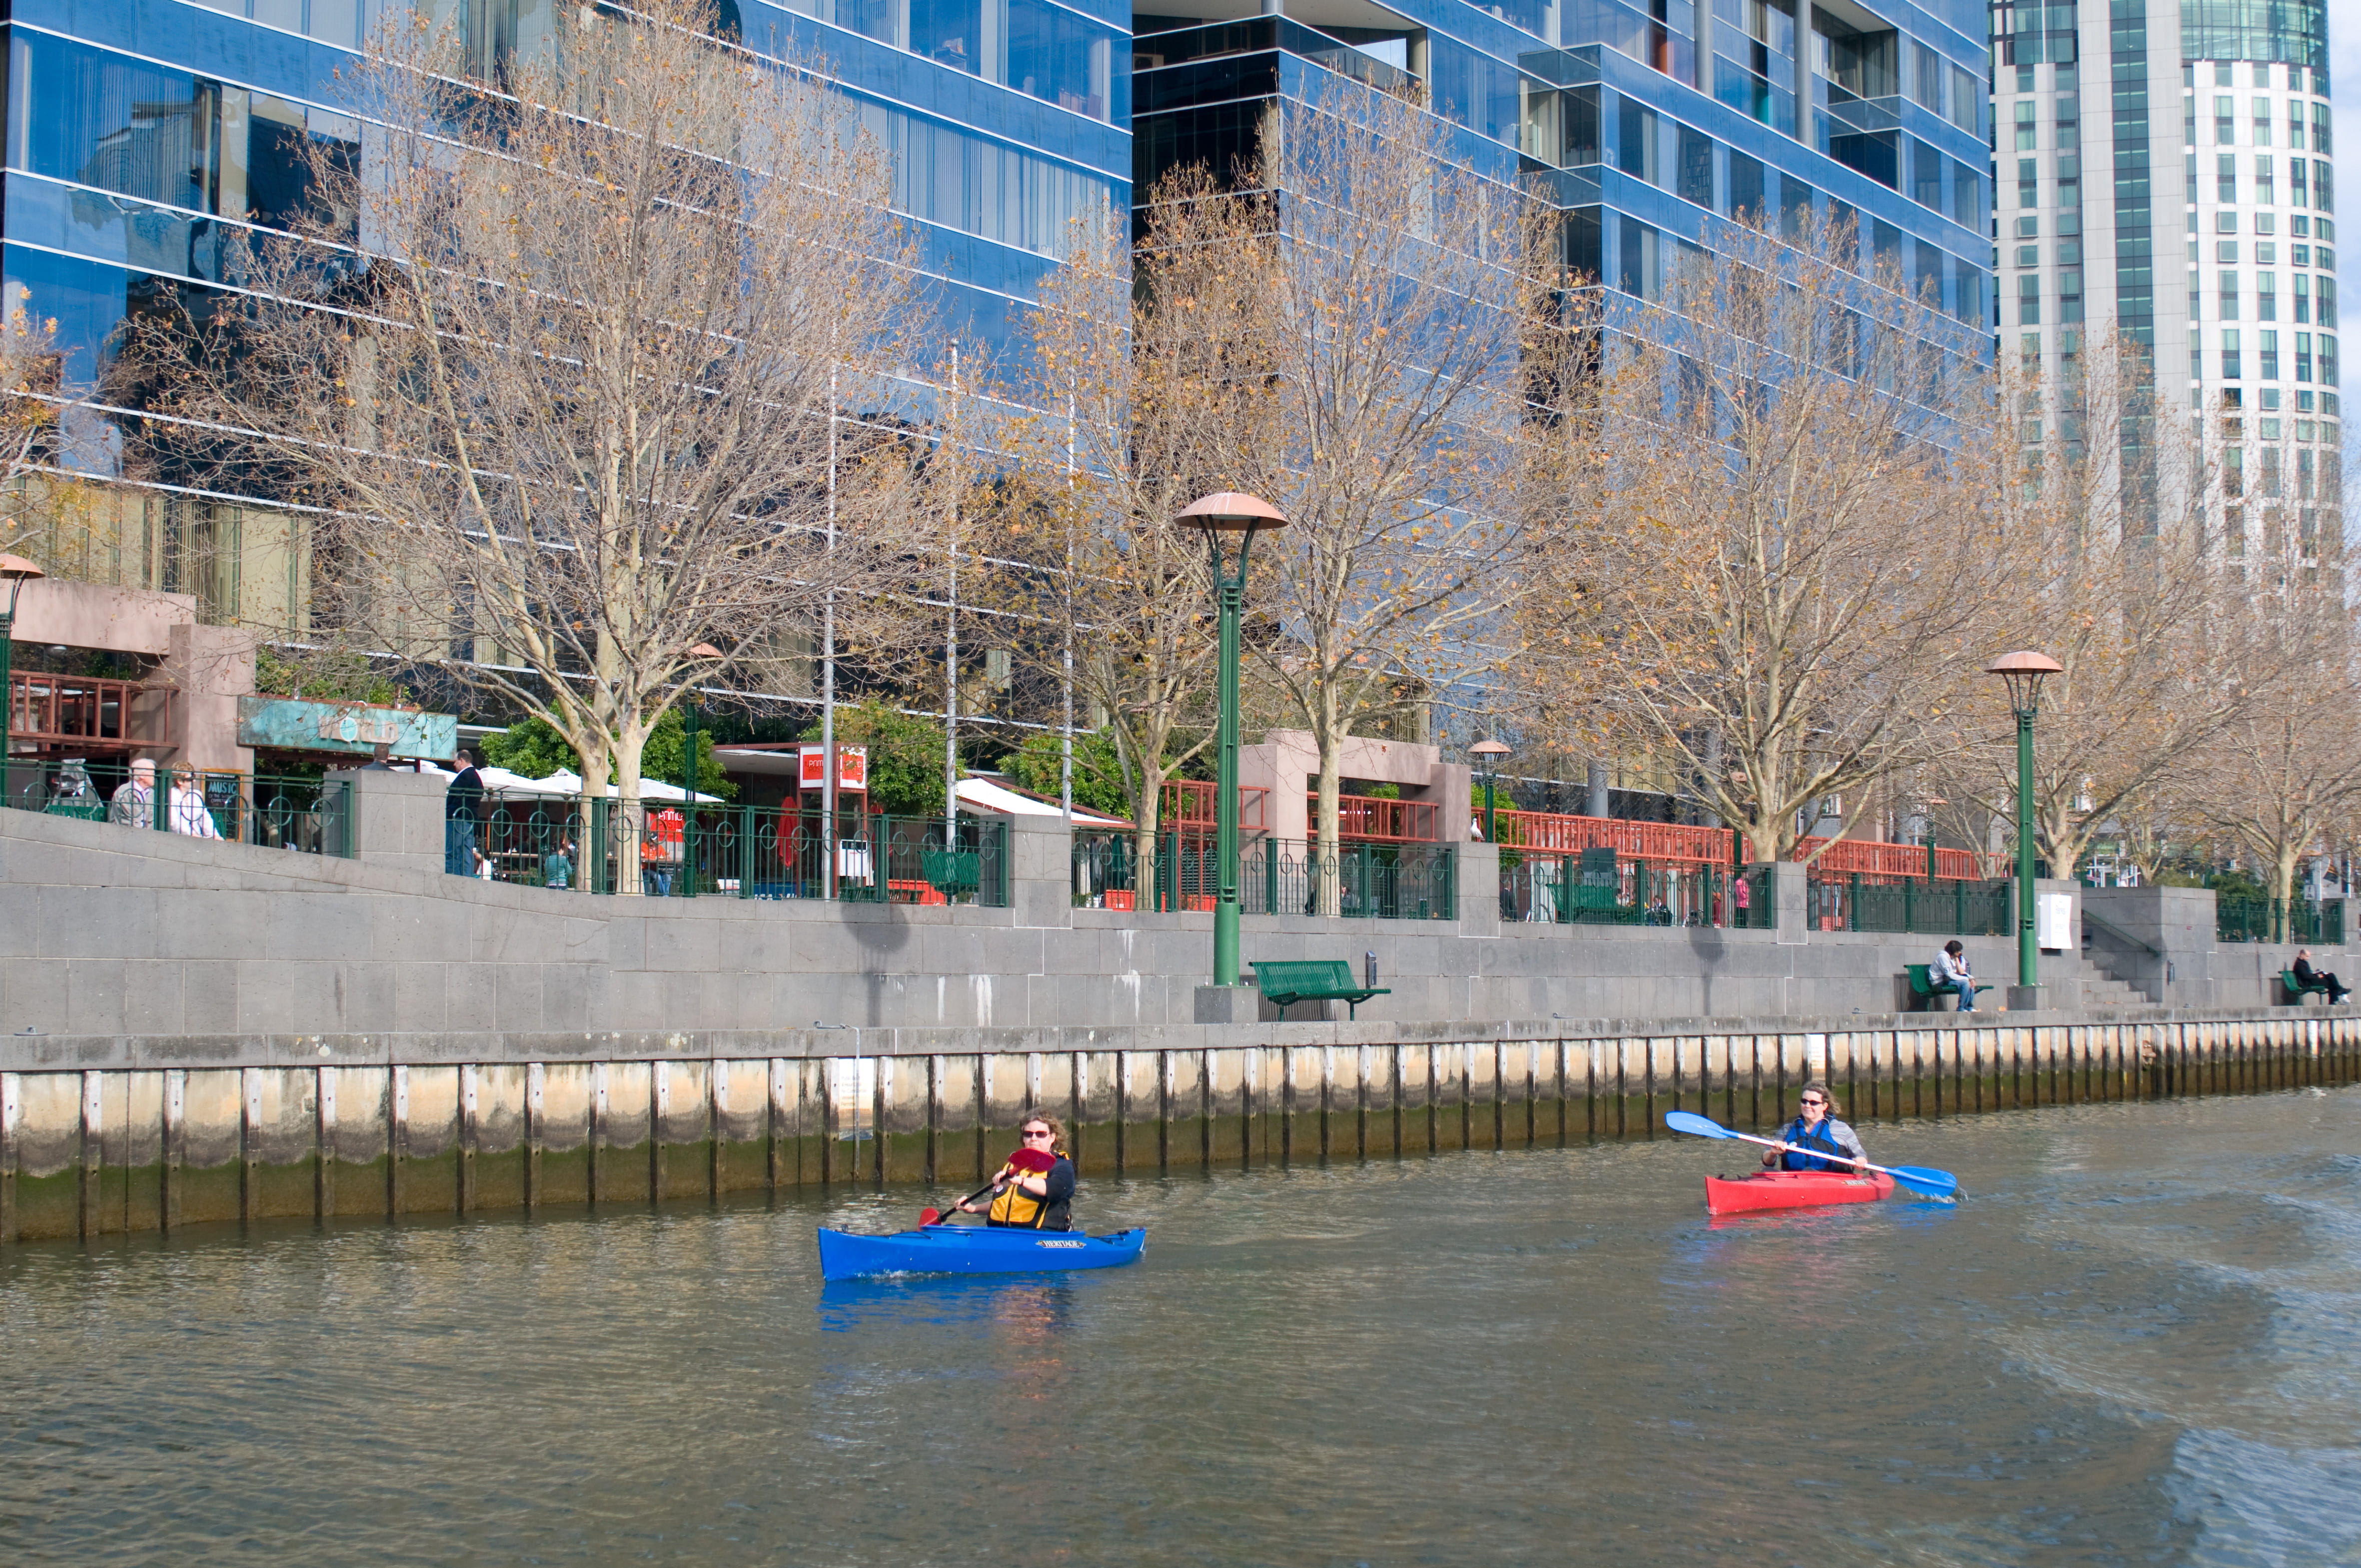 Two people kayaking on the Yarra River in Melbourne